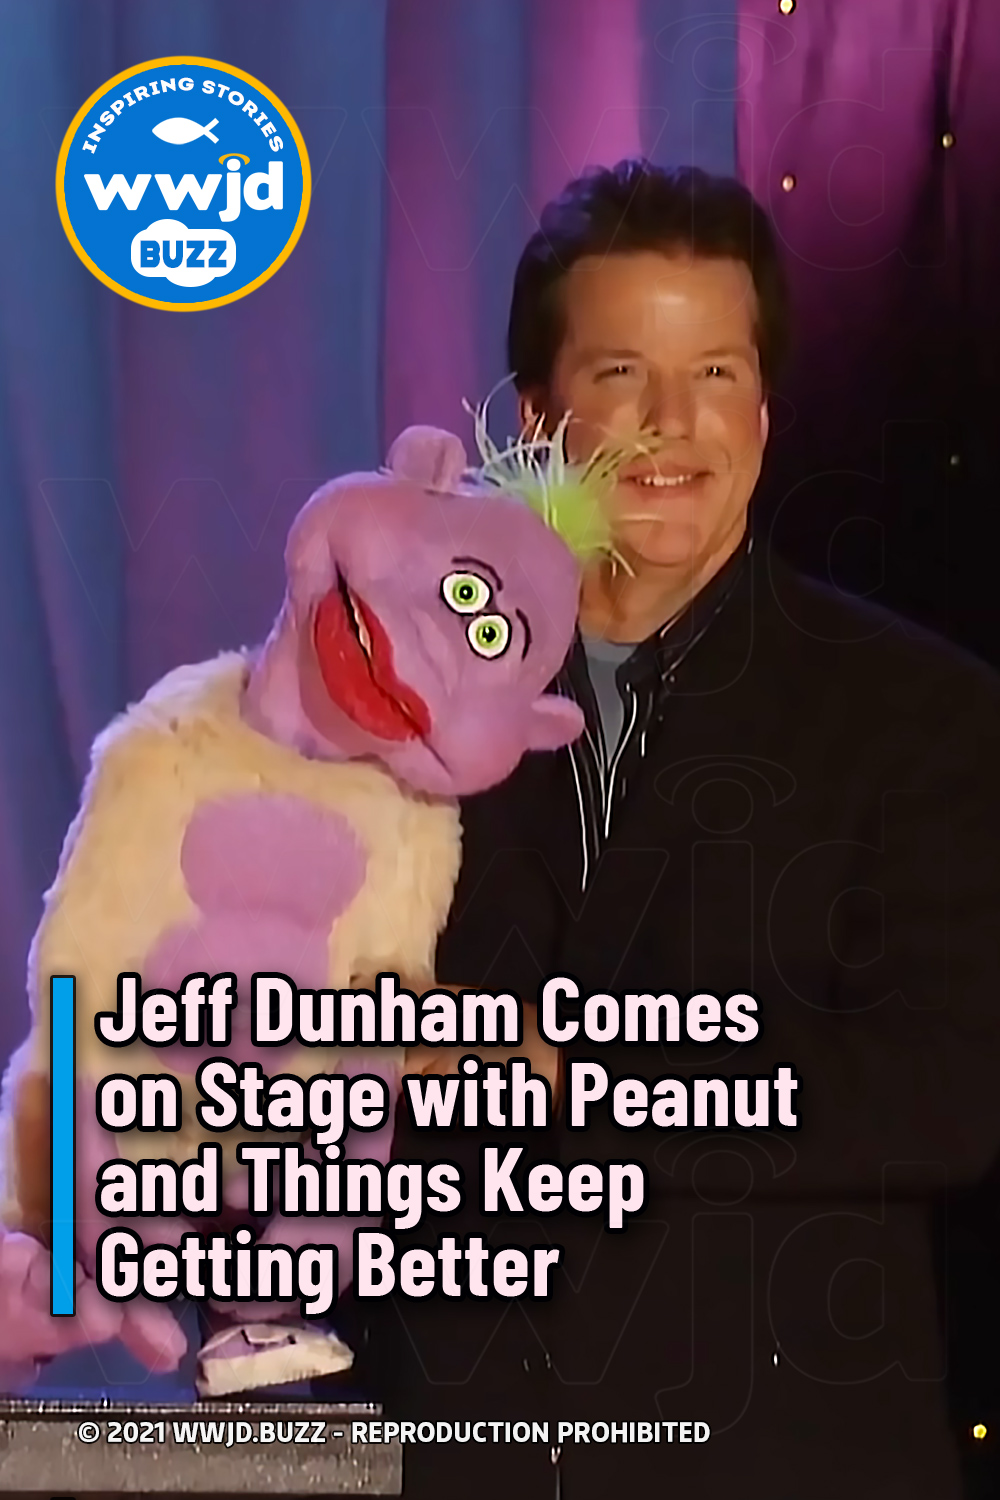 Jeff Dunham Comes on Stage with Peanut and Things Keep Getting Better